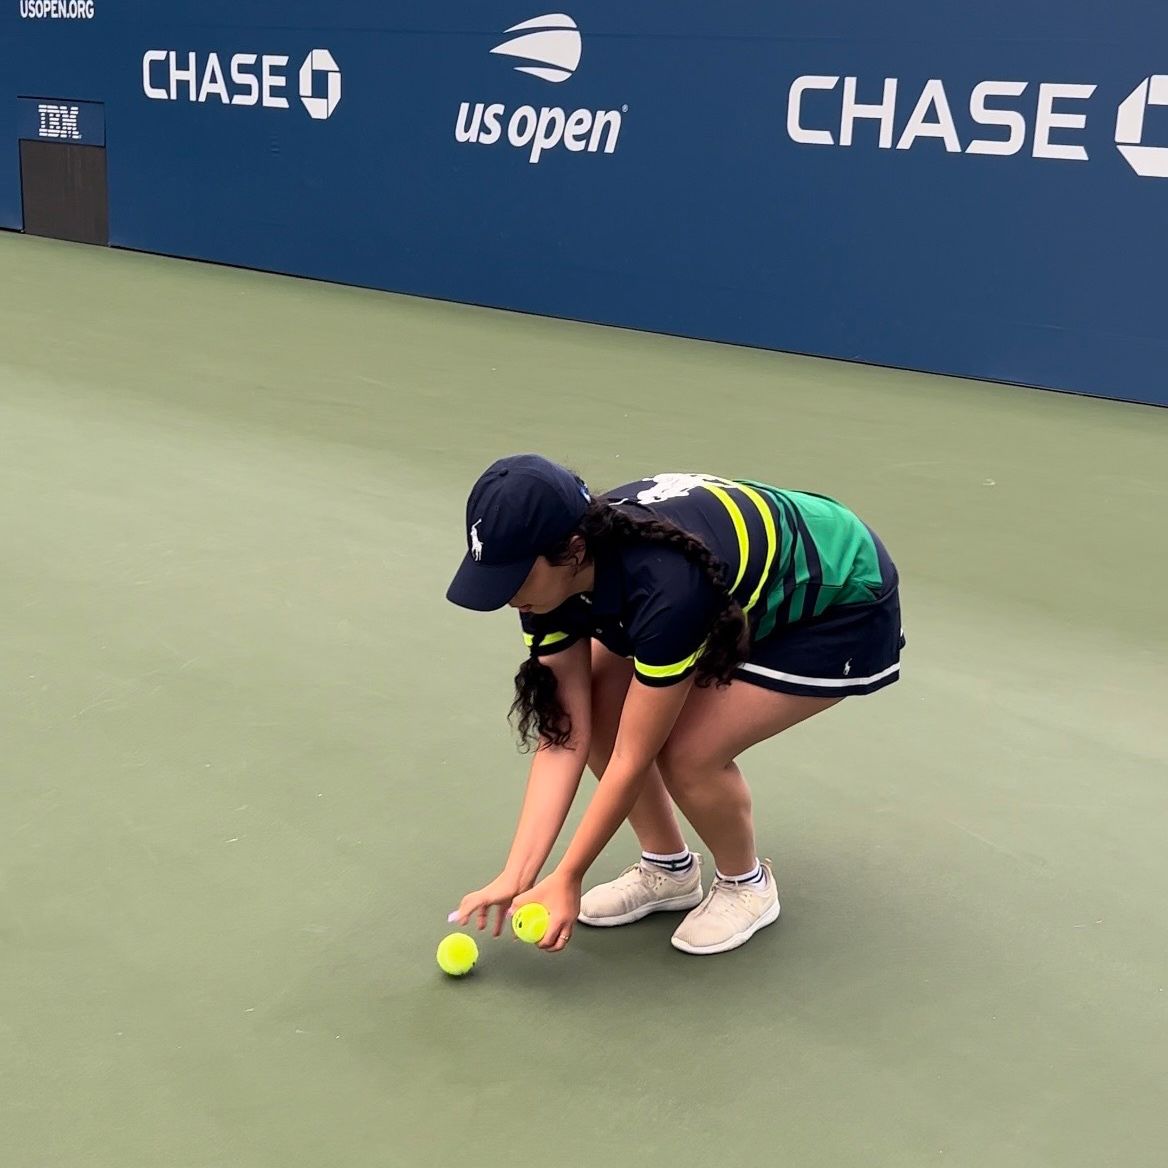 The US Open is switching tennis balls for women's matches so they're the  same ones the men use